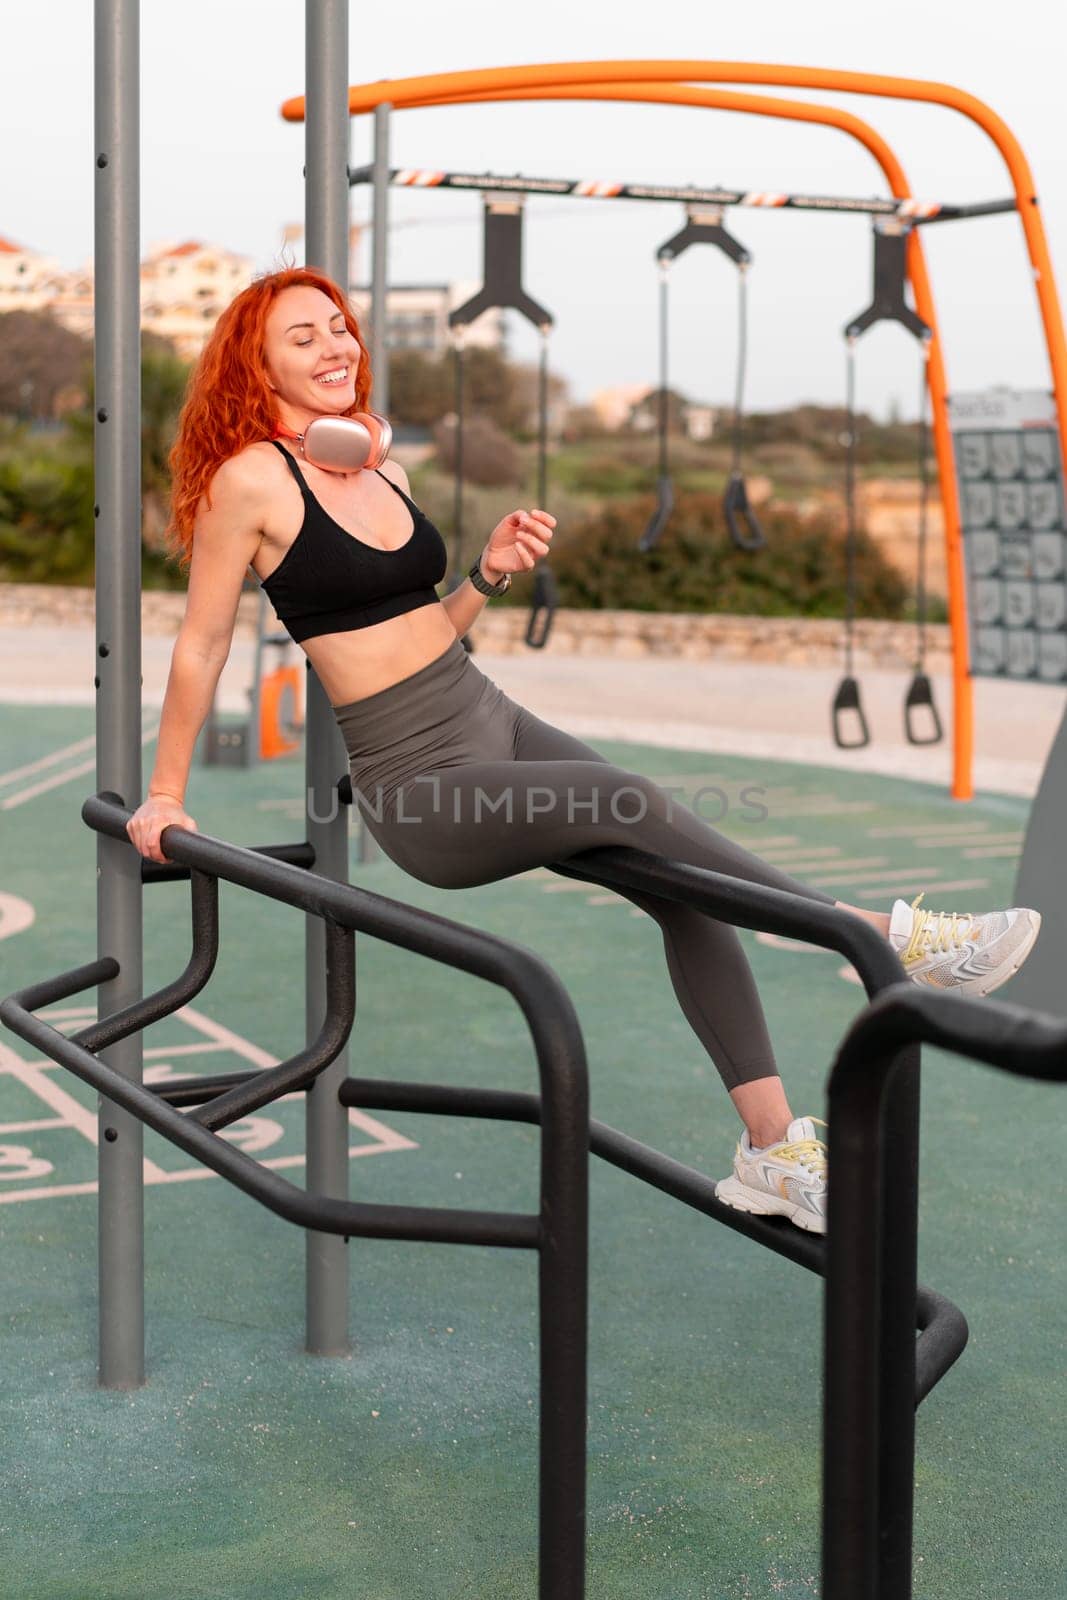 Smiling woman jogger in sportwear relaxing at gym park after morning workout. Happy redhead runner taking break while sitting on exercise equipment at summer park.